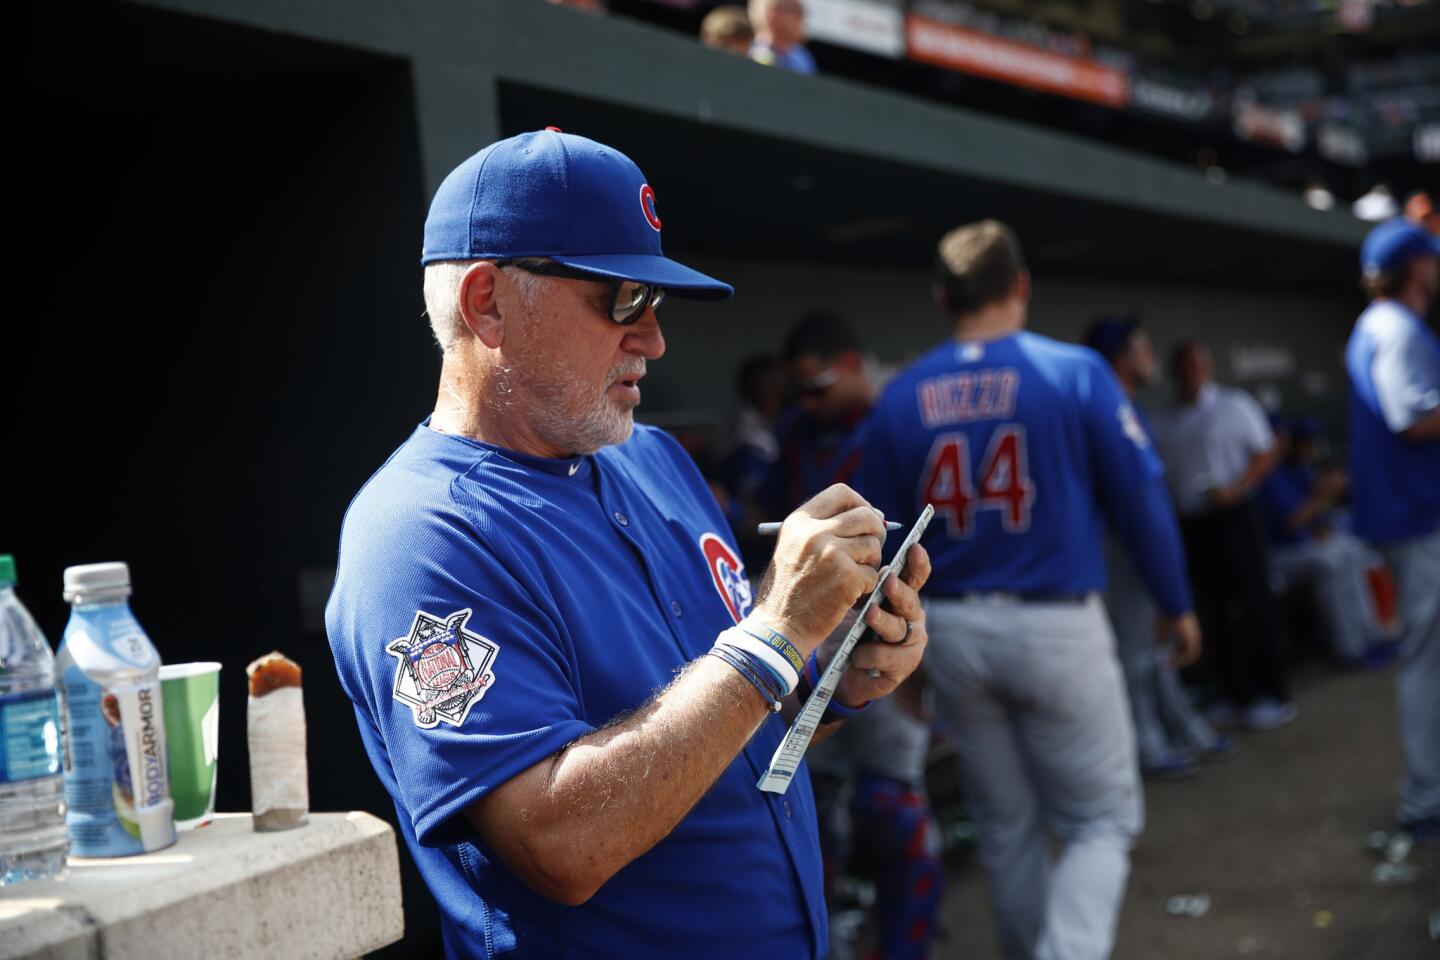 Cubs manager Joe Maddon stands in the dugout during a game against the Orioles in Baltimore on Sunday, July 16, 2017.